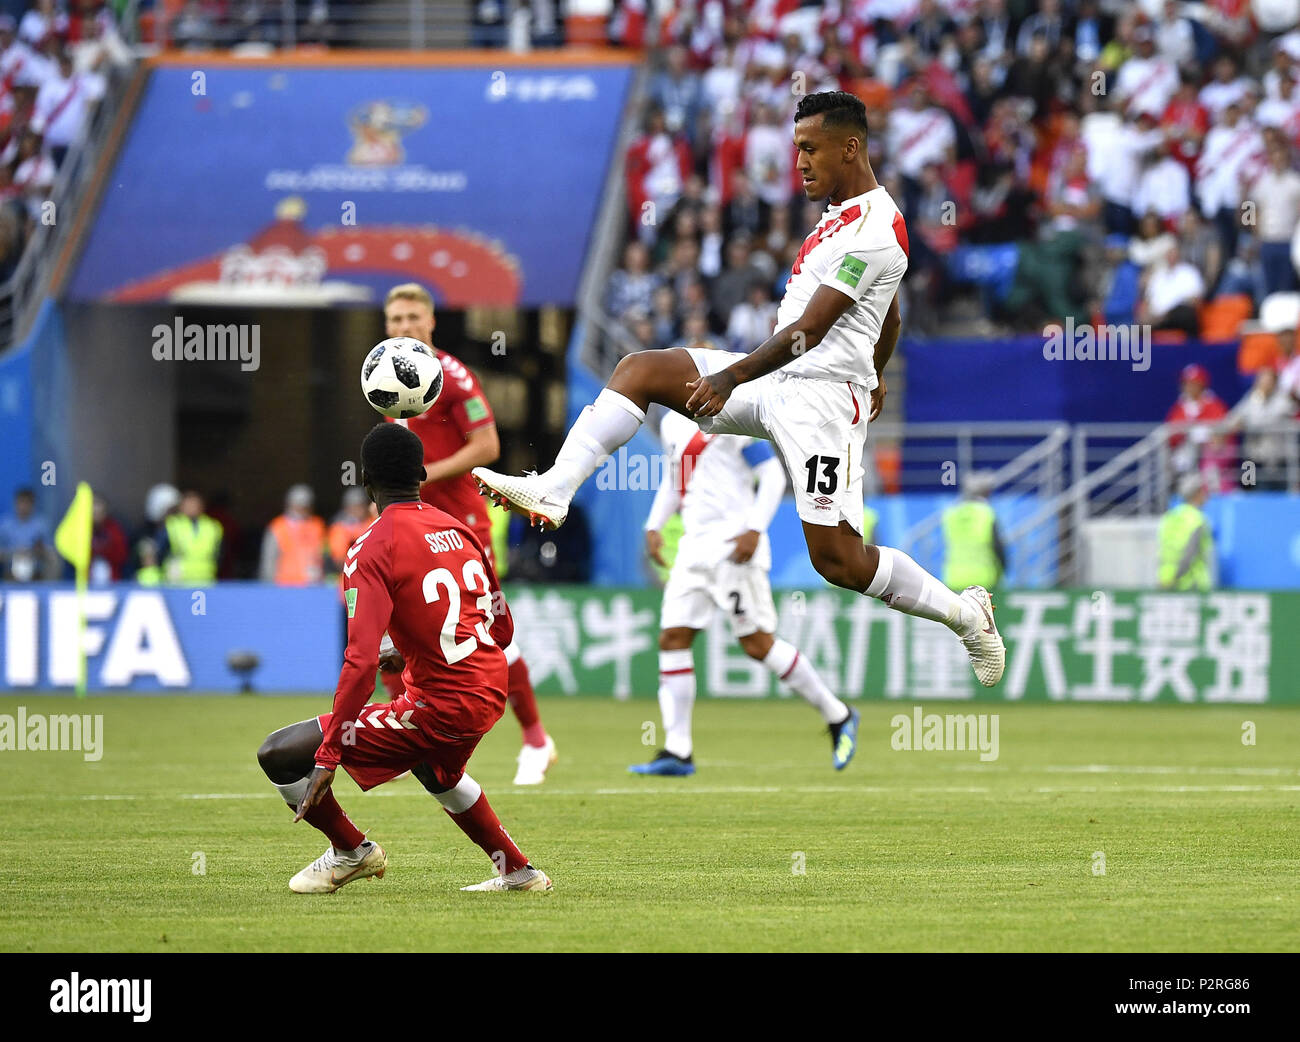 Saransk, Russia. 16th June, 2018. Renato Tapia (top) of Peru competes during a group C match between Peru and Denmark at the 2018 FIFA World Cup in Saransk, Russia, June 16, 2018. Credit: He Canling/Xinhua/Alamy Live News Stock Photo